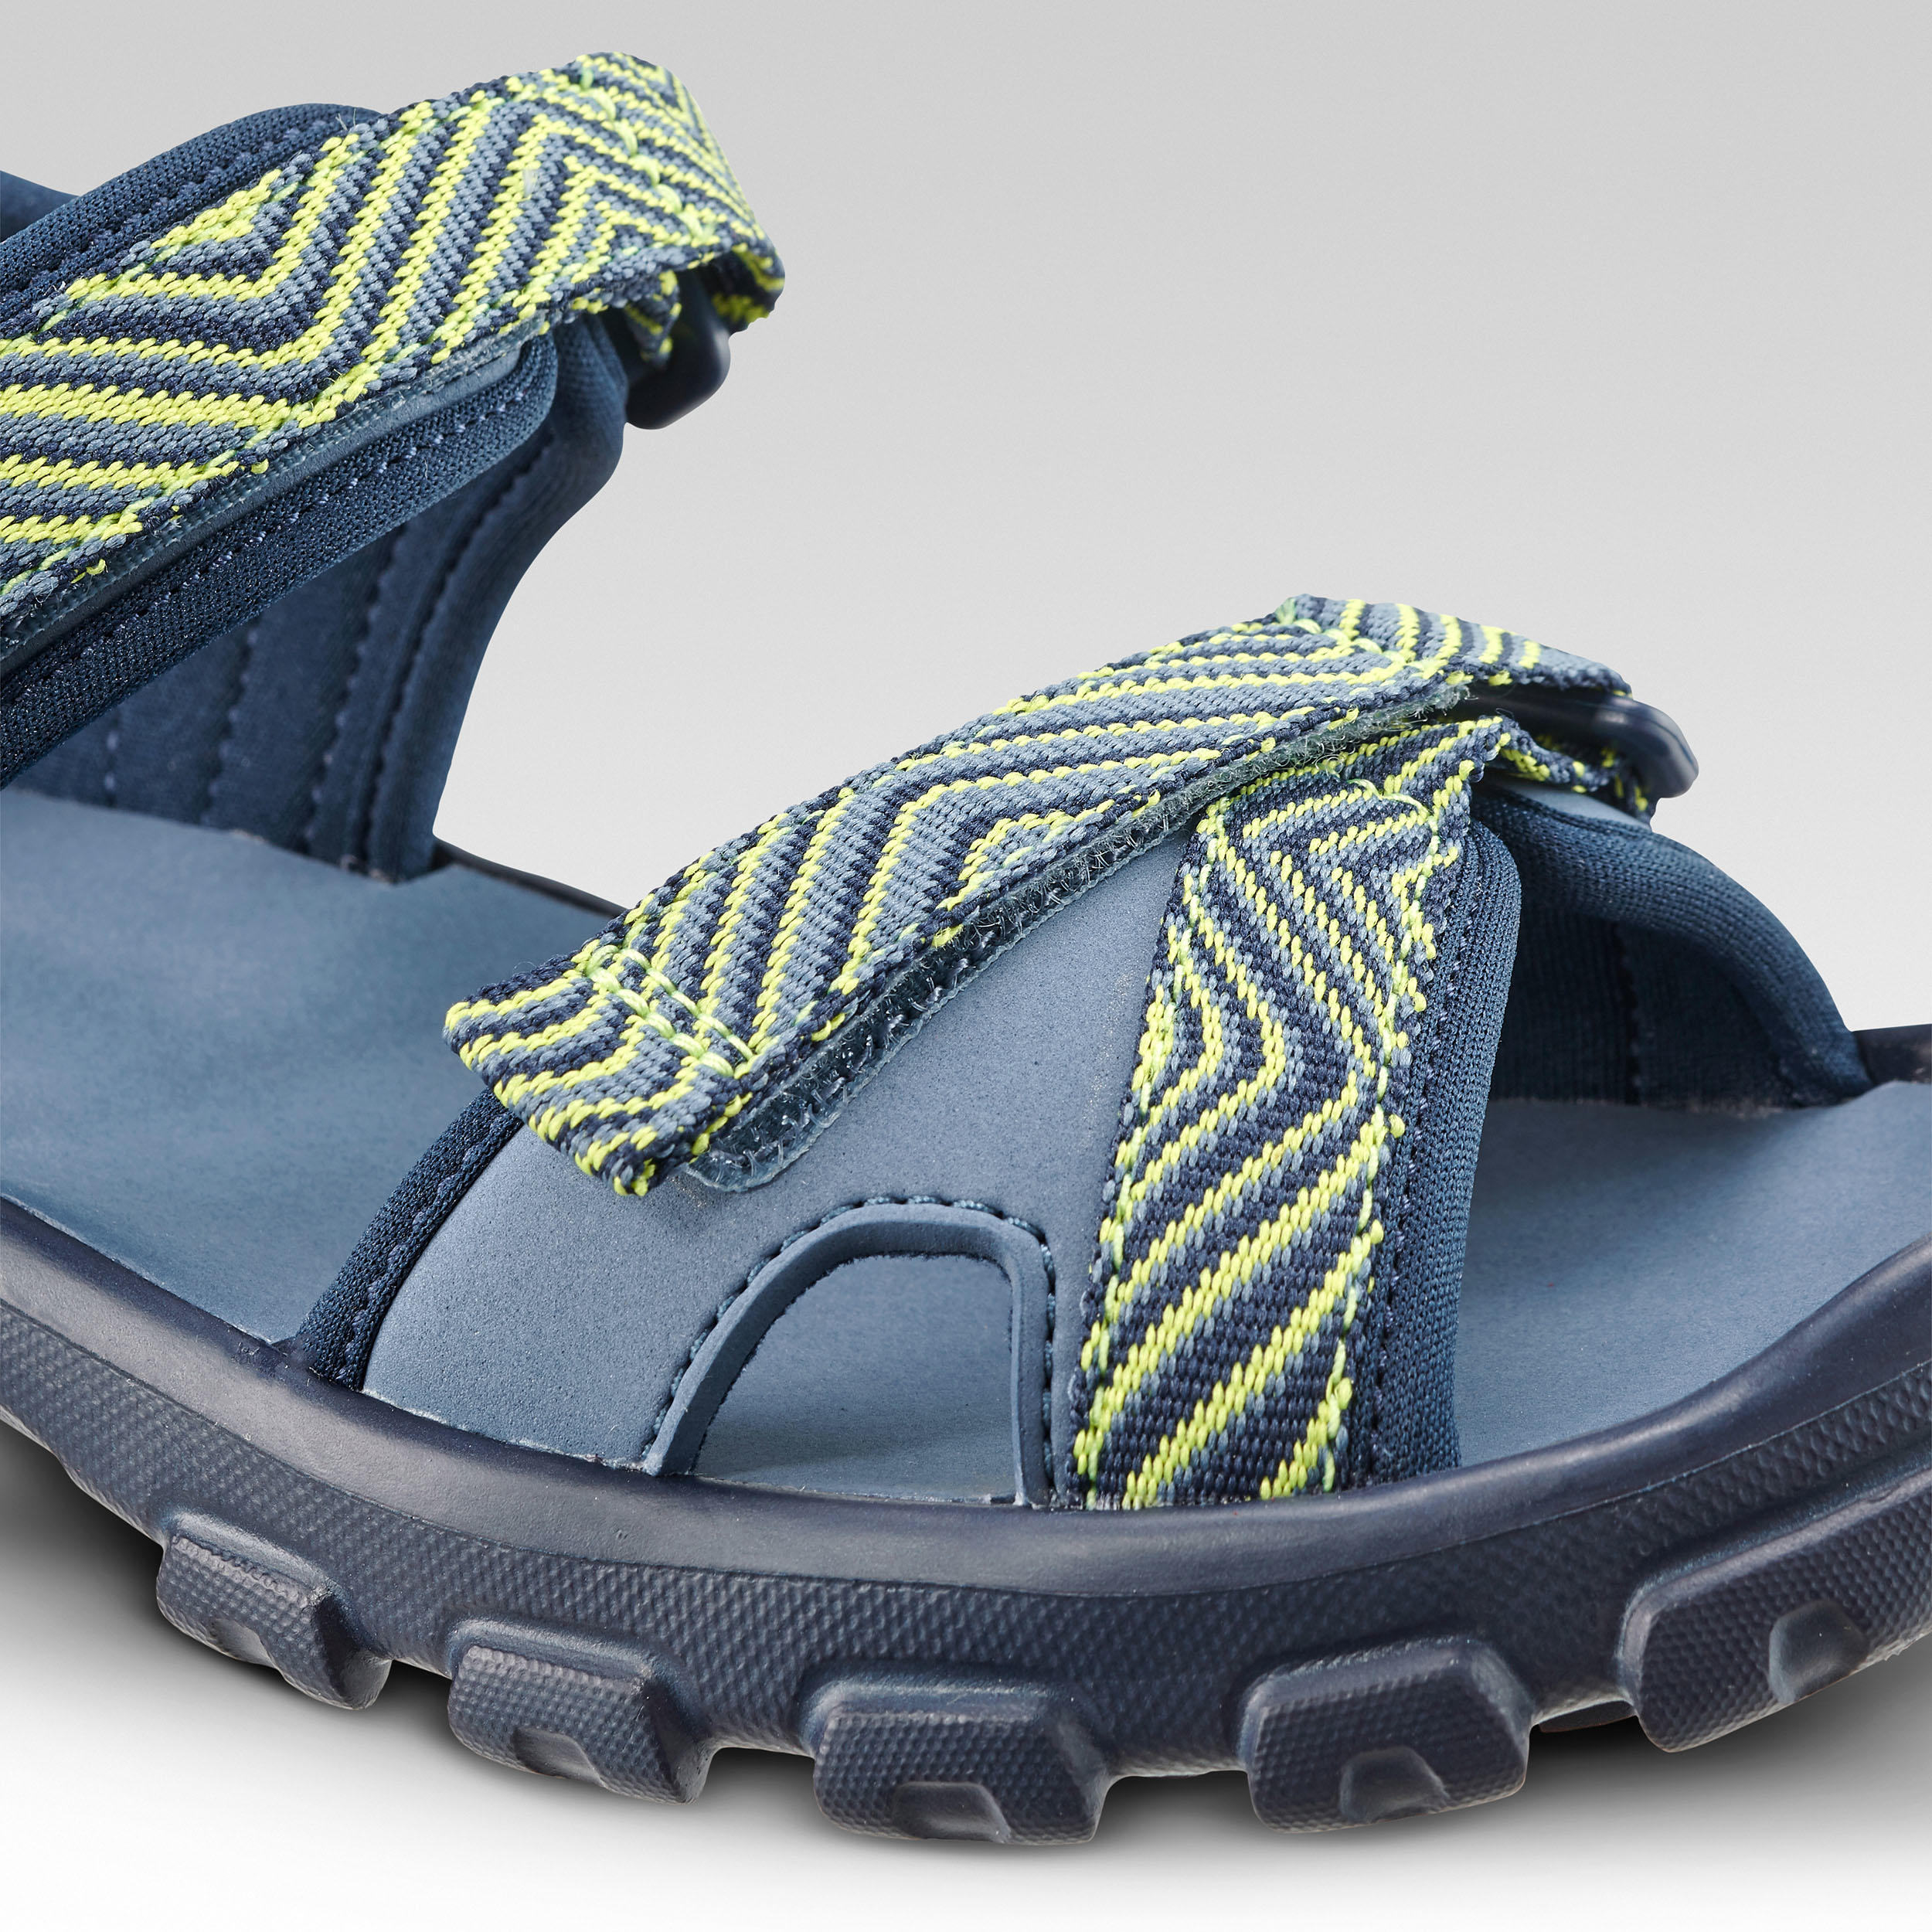 Kids’ Hiking Sandals MH100 TW - Blue and Yellow - Junior UK size 13 to 4 9/9